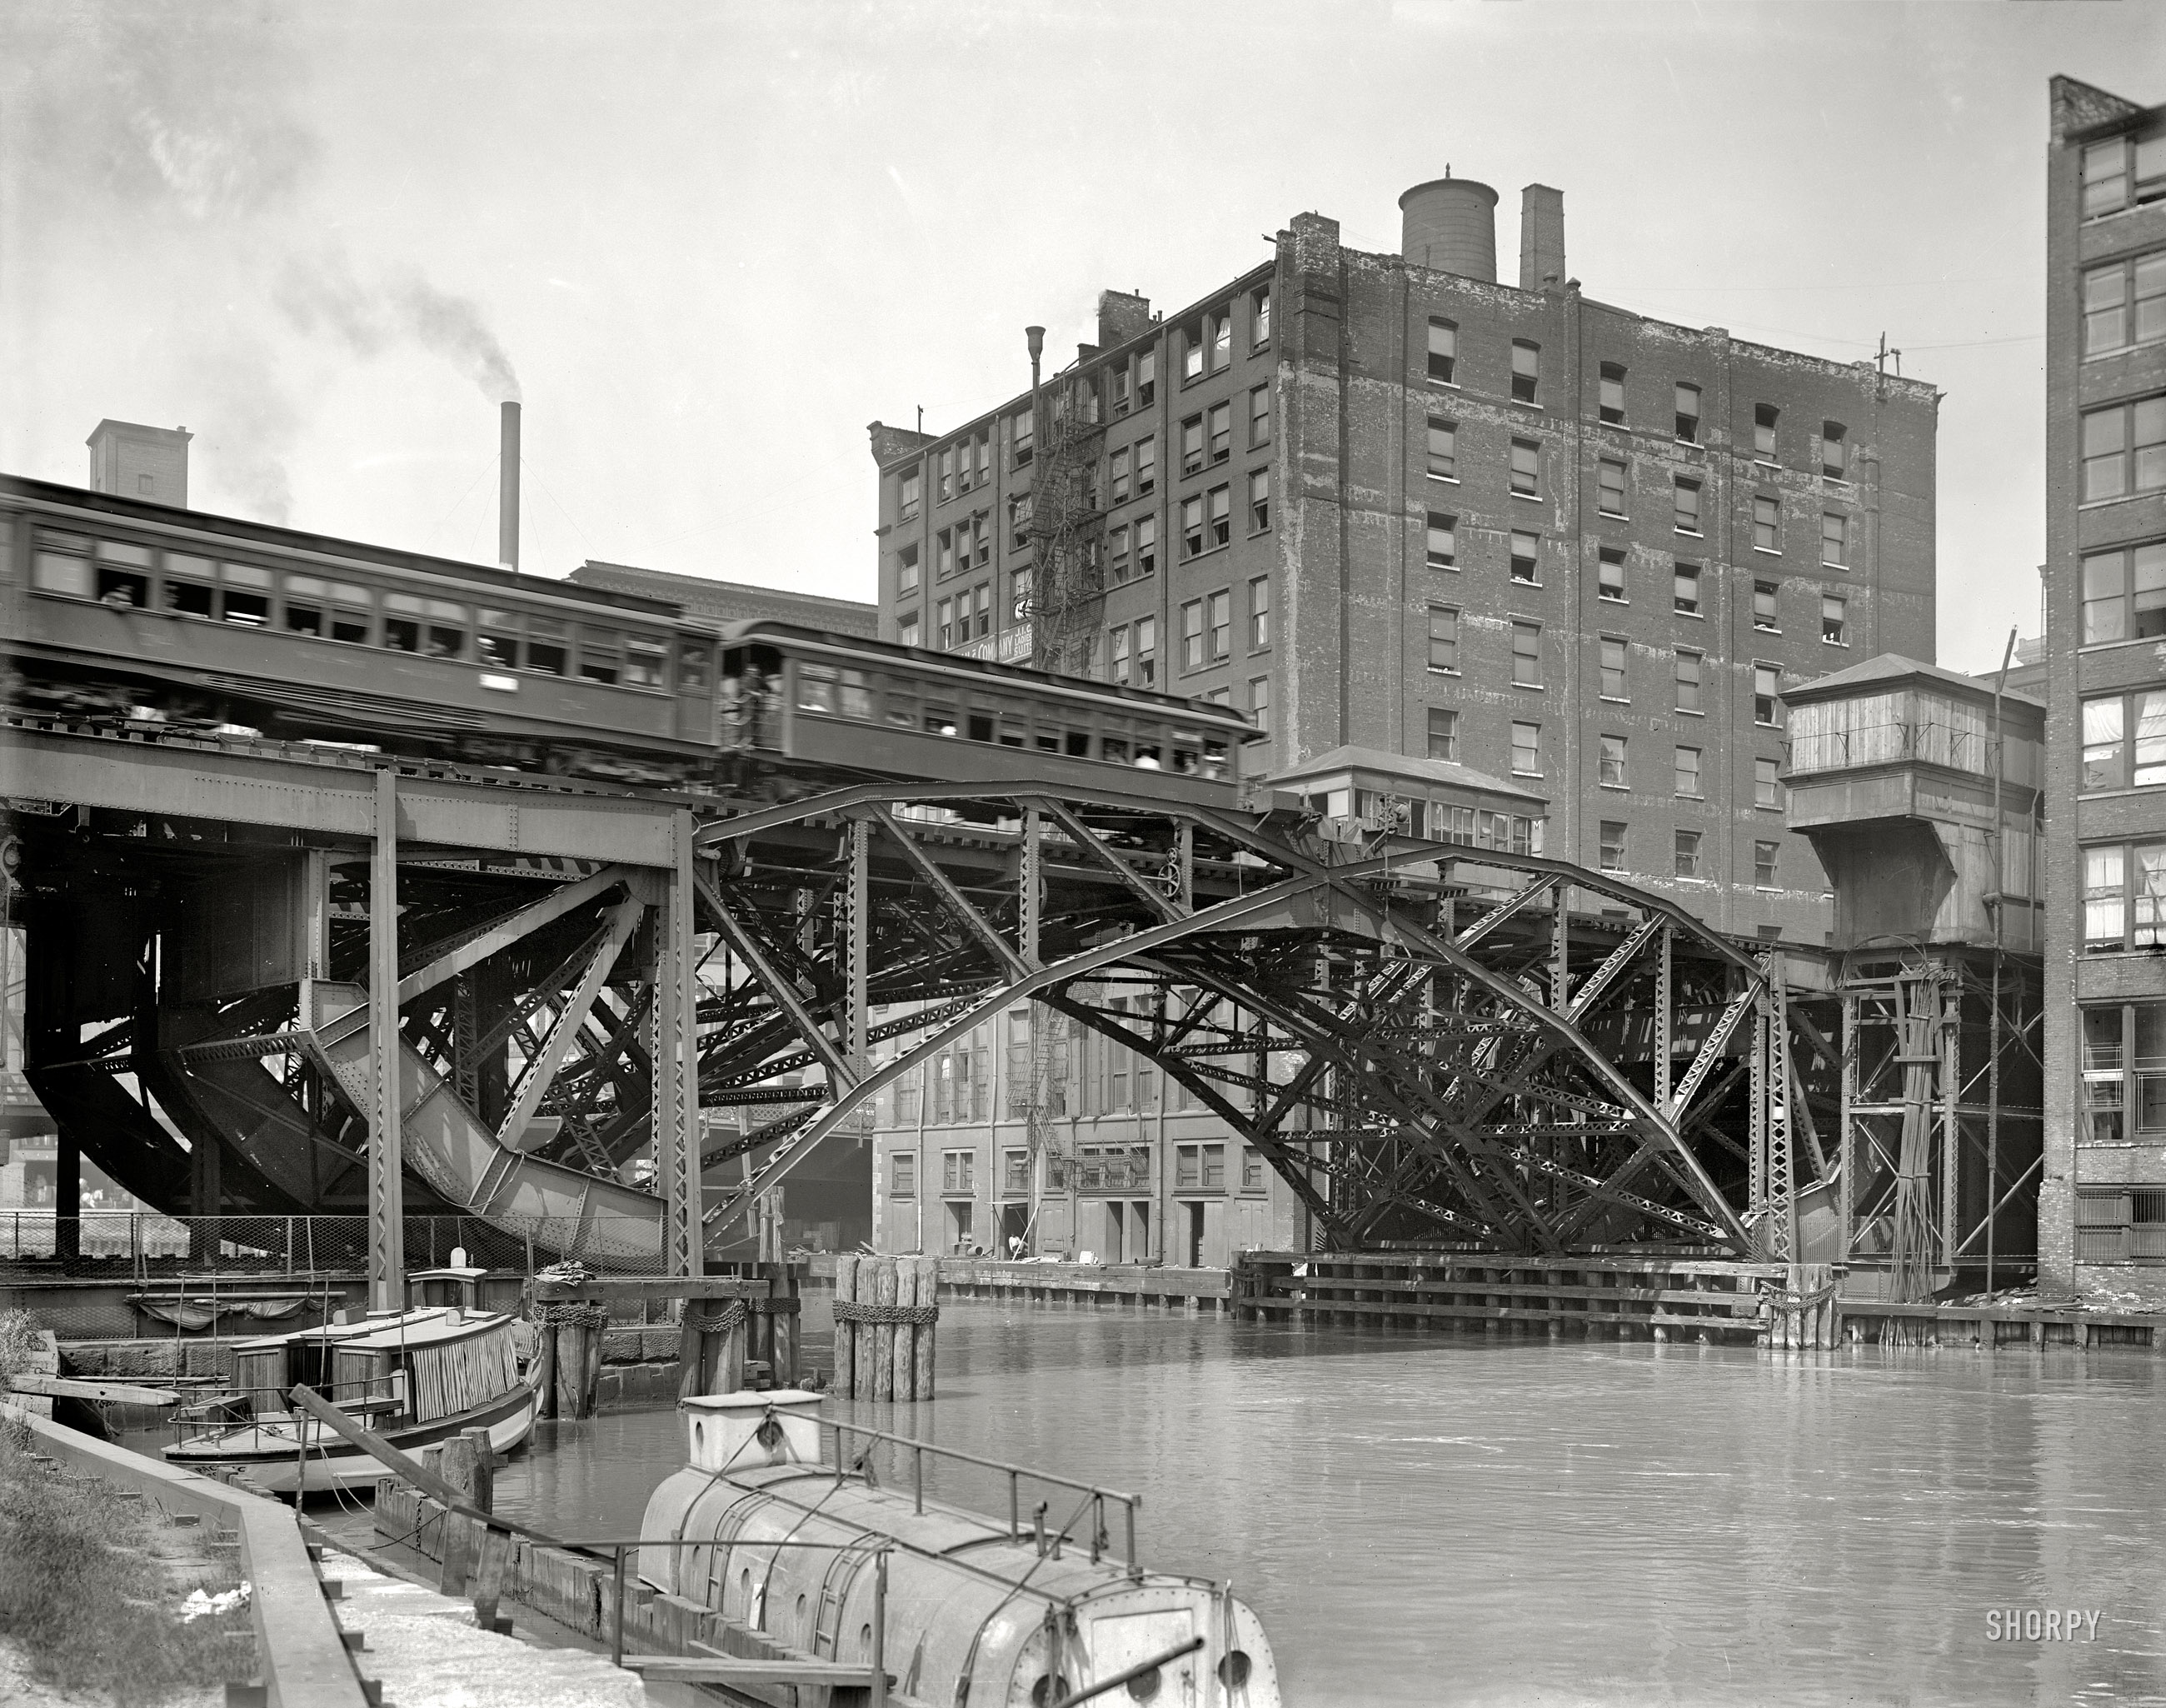 Chicago, Illinois, circa 1907. "Jackknife Bridge, Chicago River." Our second look at this riveting (and riveted) span. Glass negative by Hans Behm. View full size.